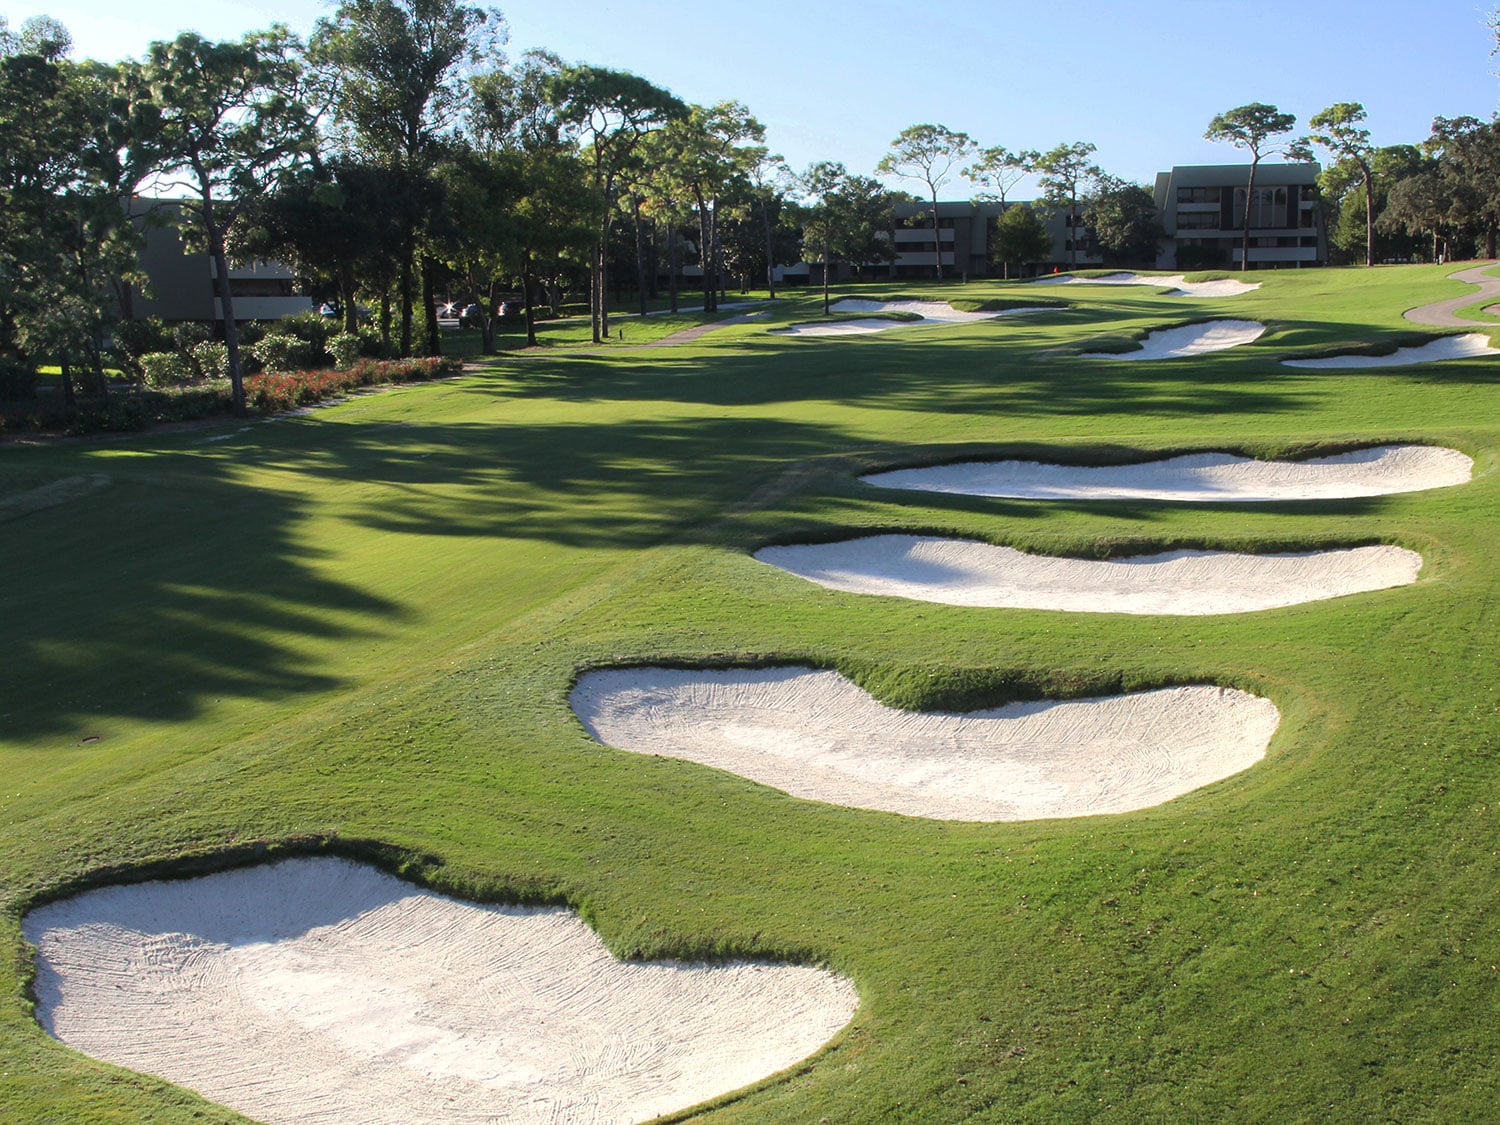 An aerial view of the Copperhead Course's 18th hole sand traps and green at Innisbrook Golf Resort in Palm Harbor, Florida.